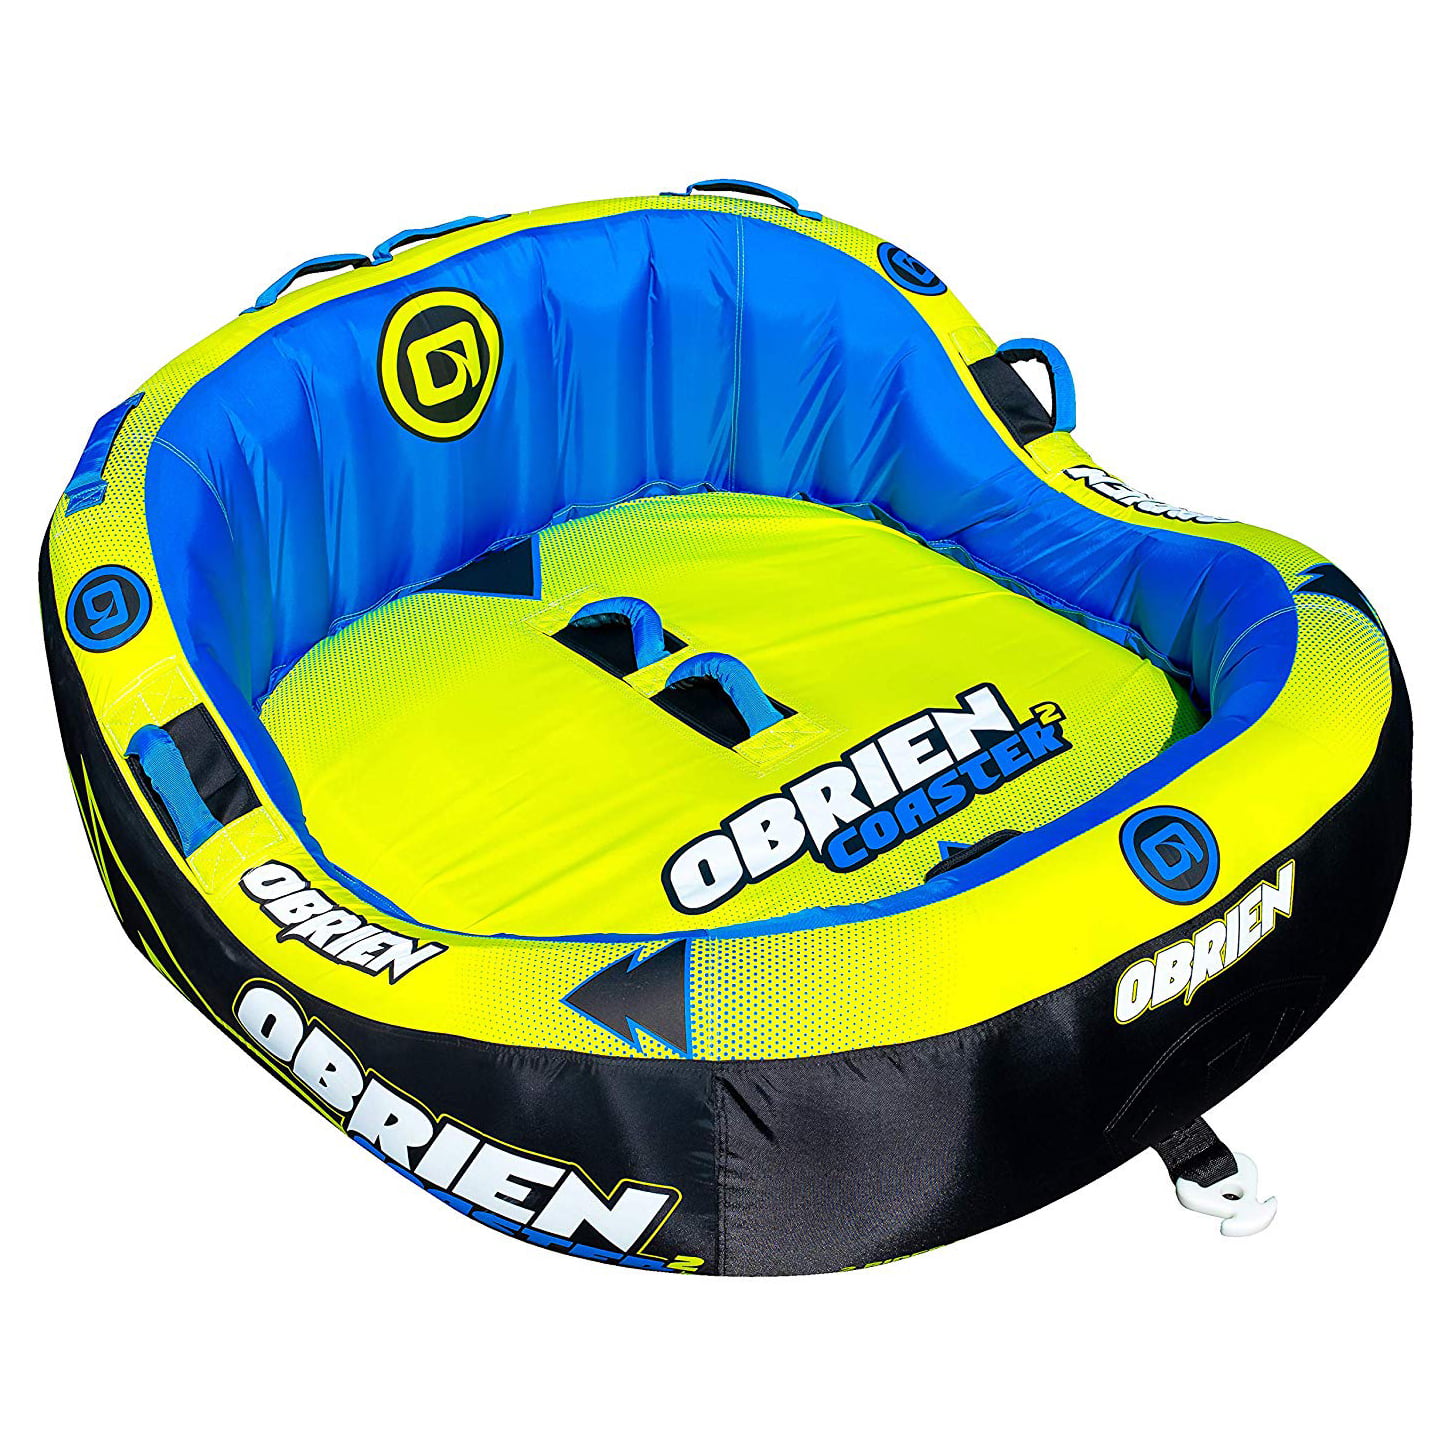 Obrien Watersports Pool Lounge EZ Chair Lake Boat Tube River Beach Party Surf 